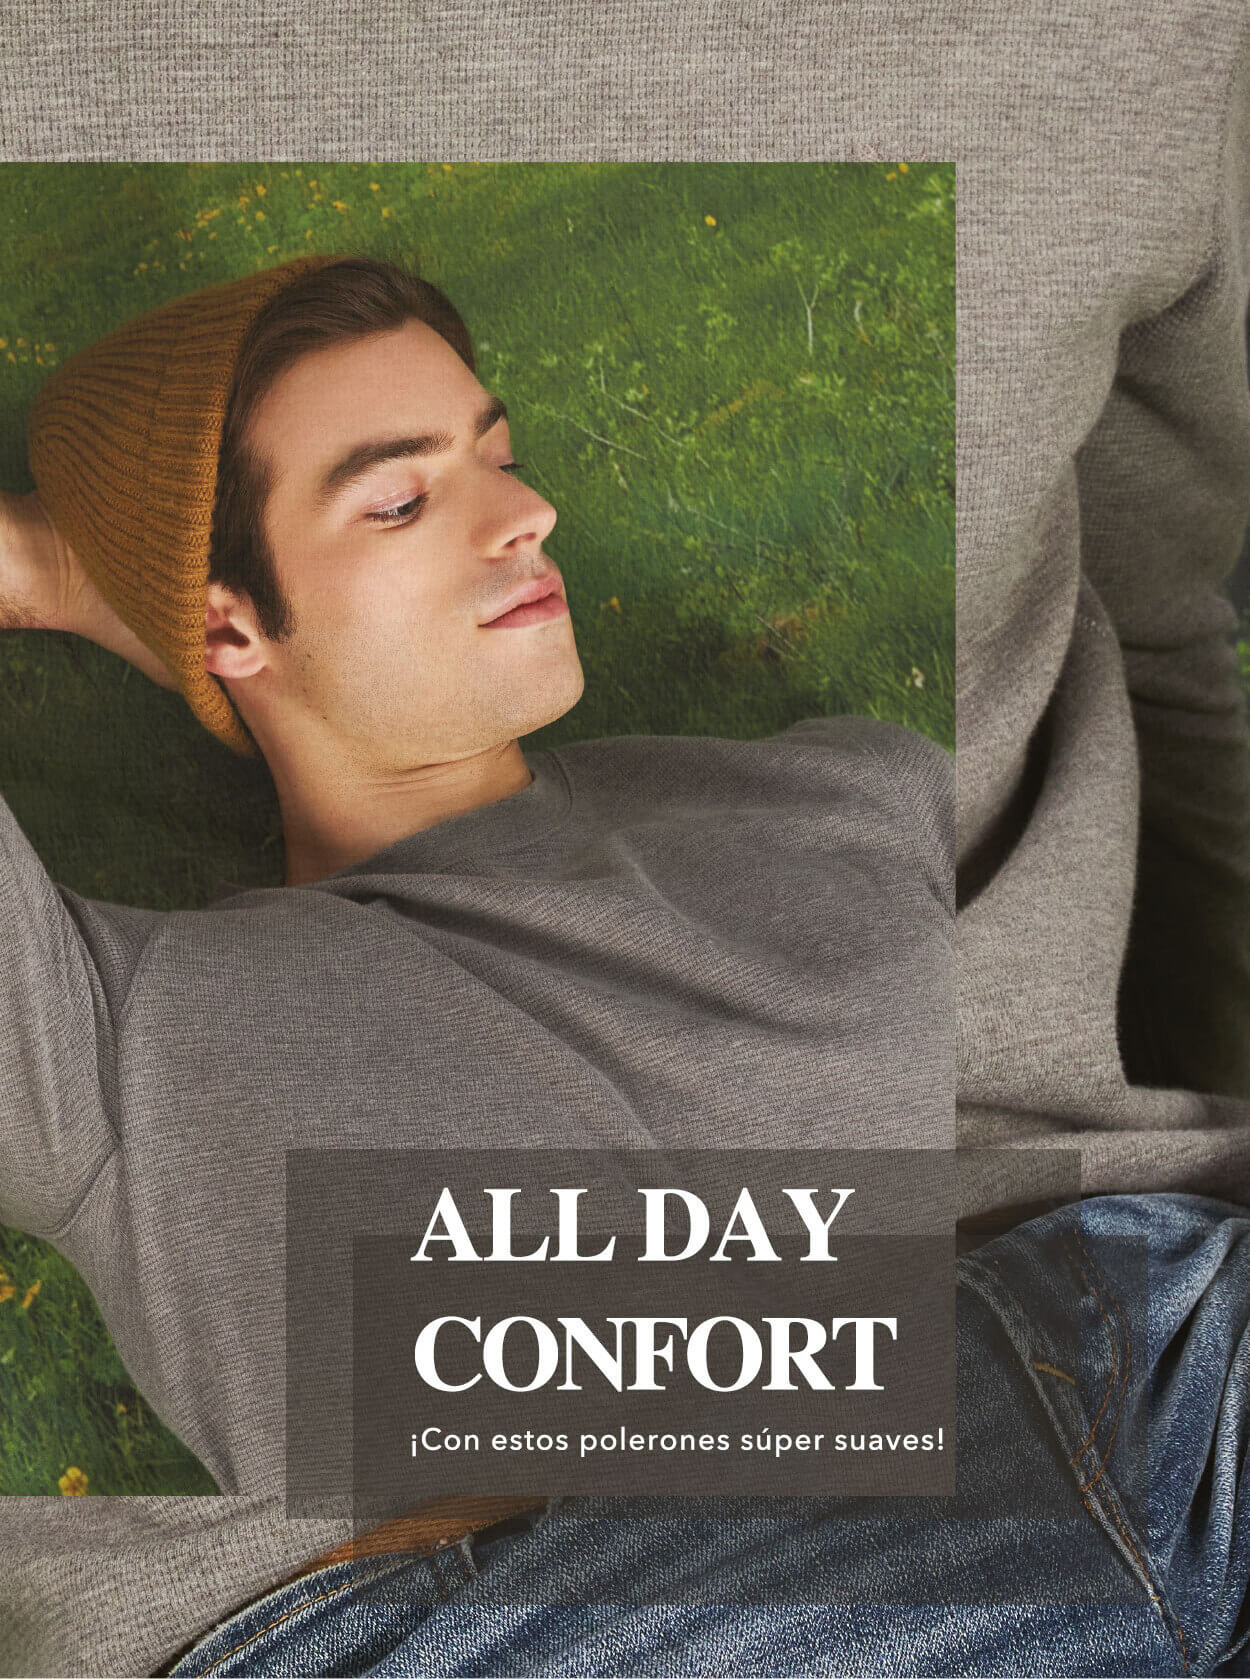 All day confort!, American Eagle